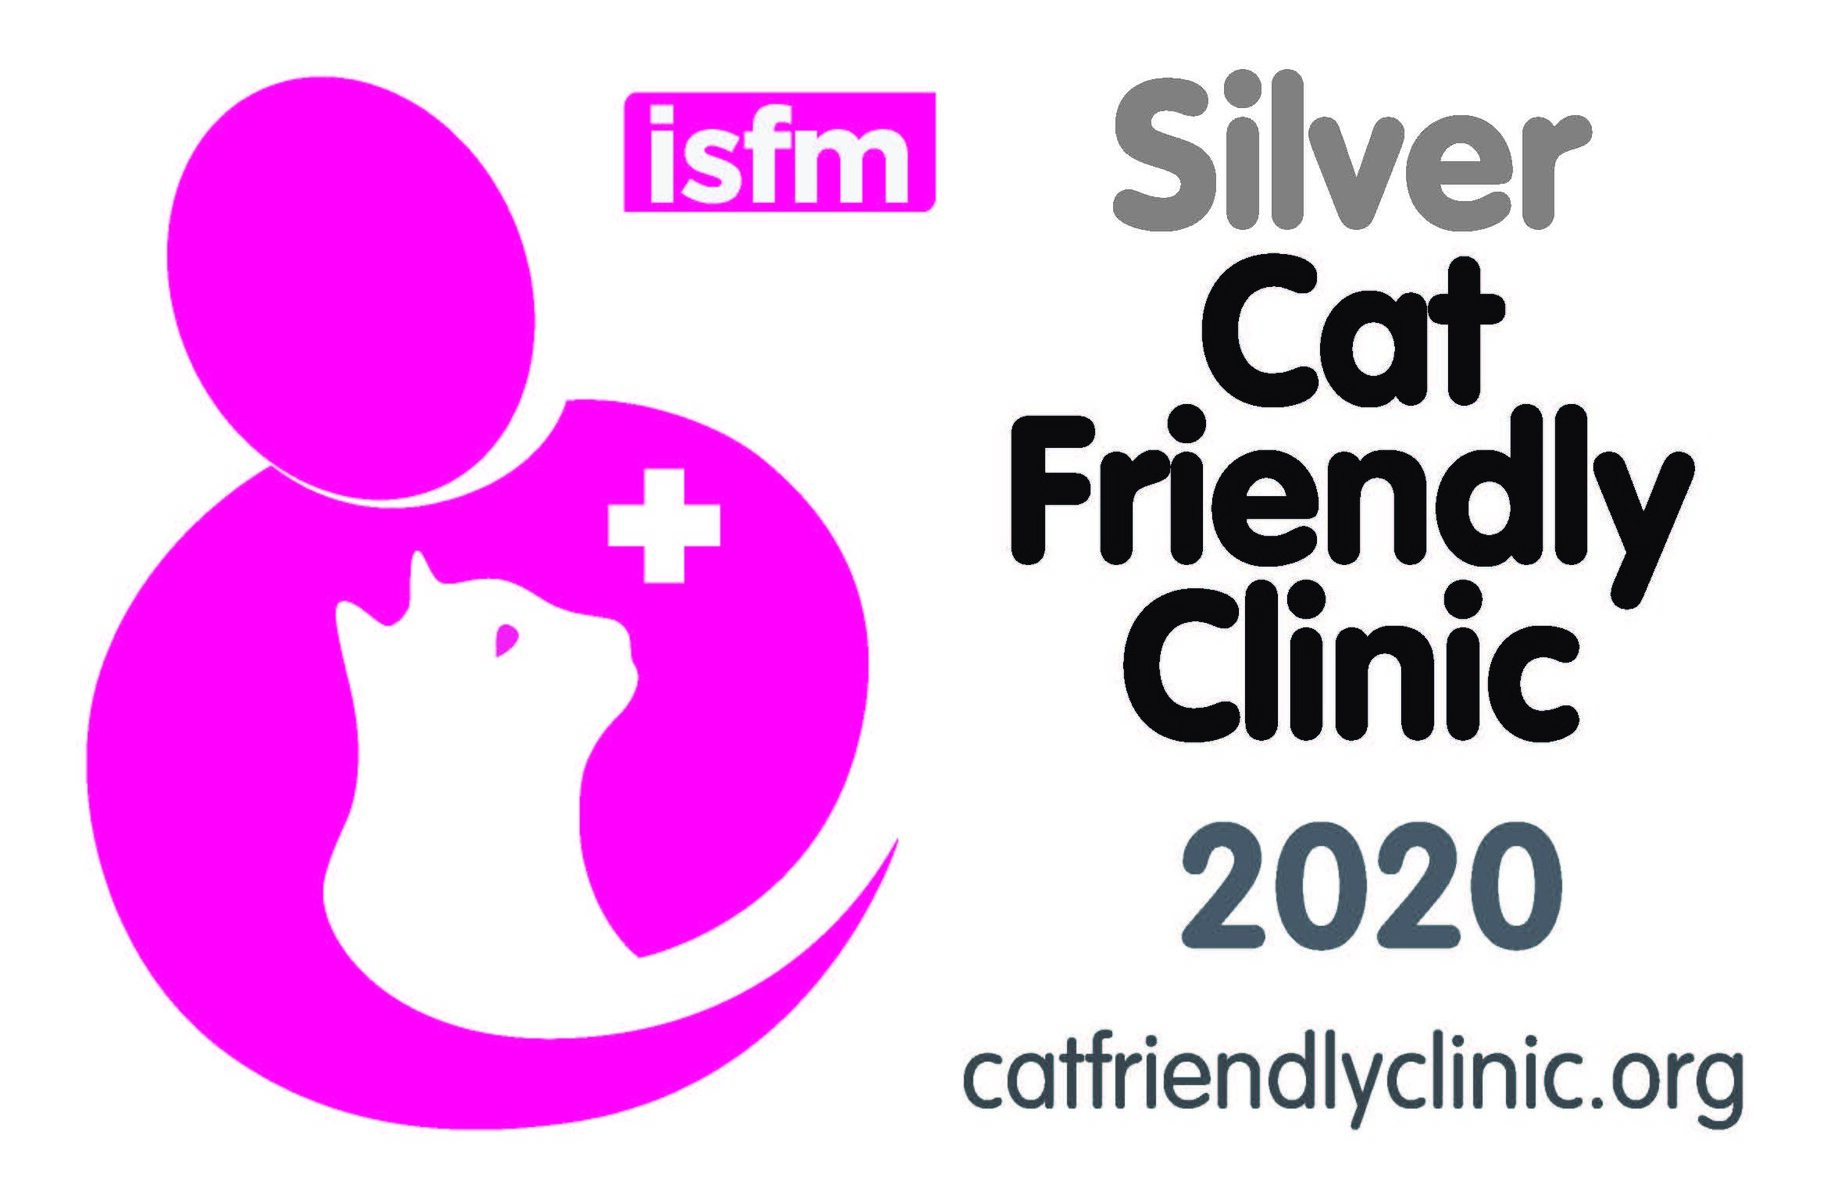 Cat friendly clinic 2020 Silver accreditation